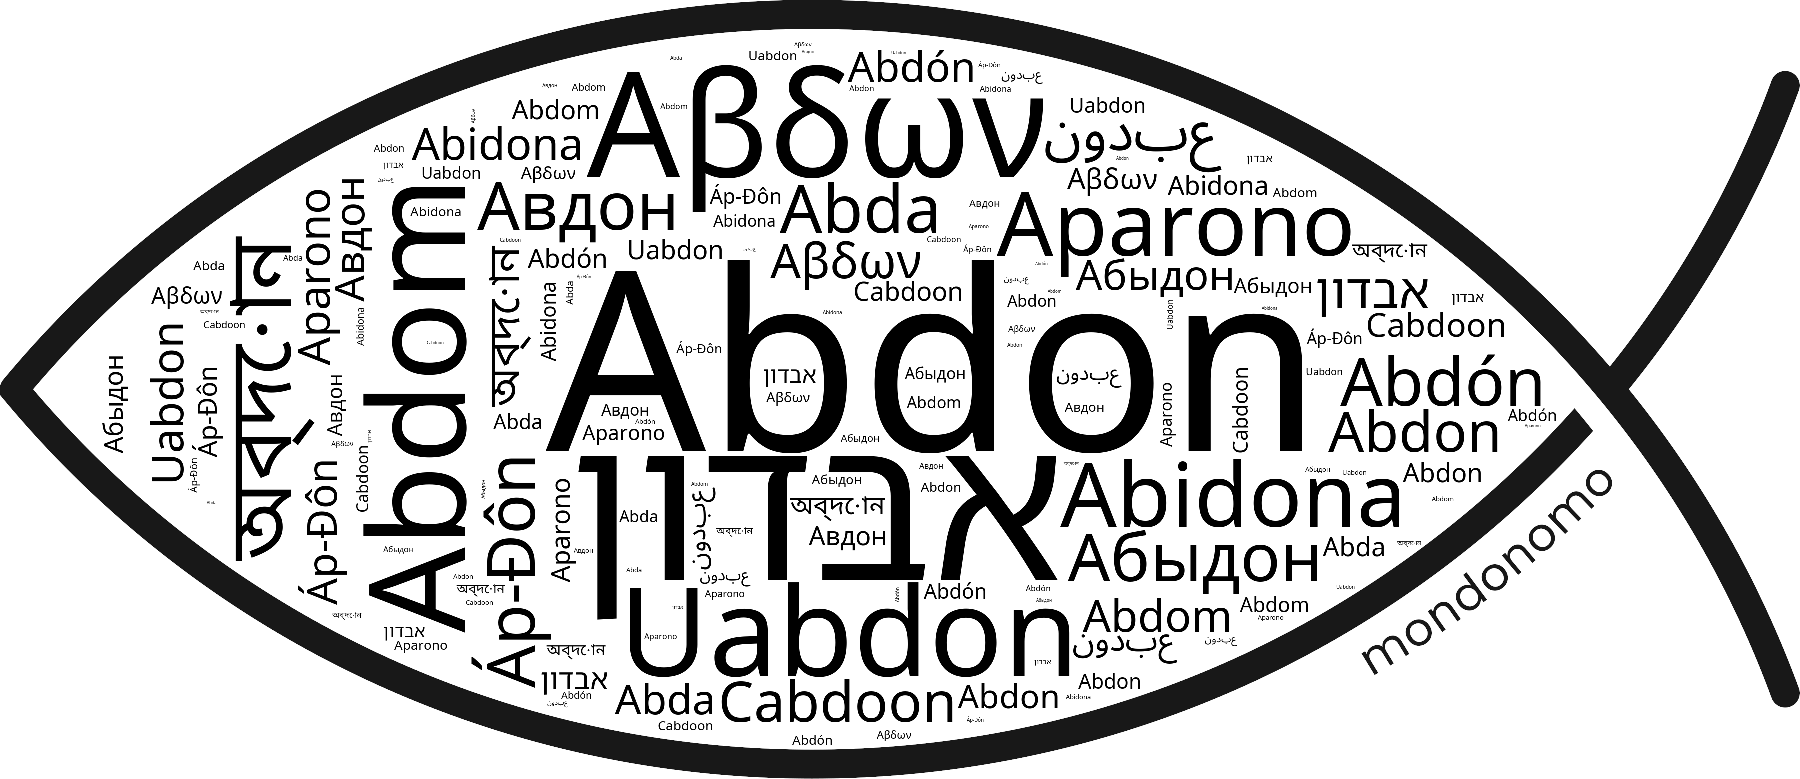 Name Abdon in the world's Bibles